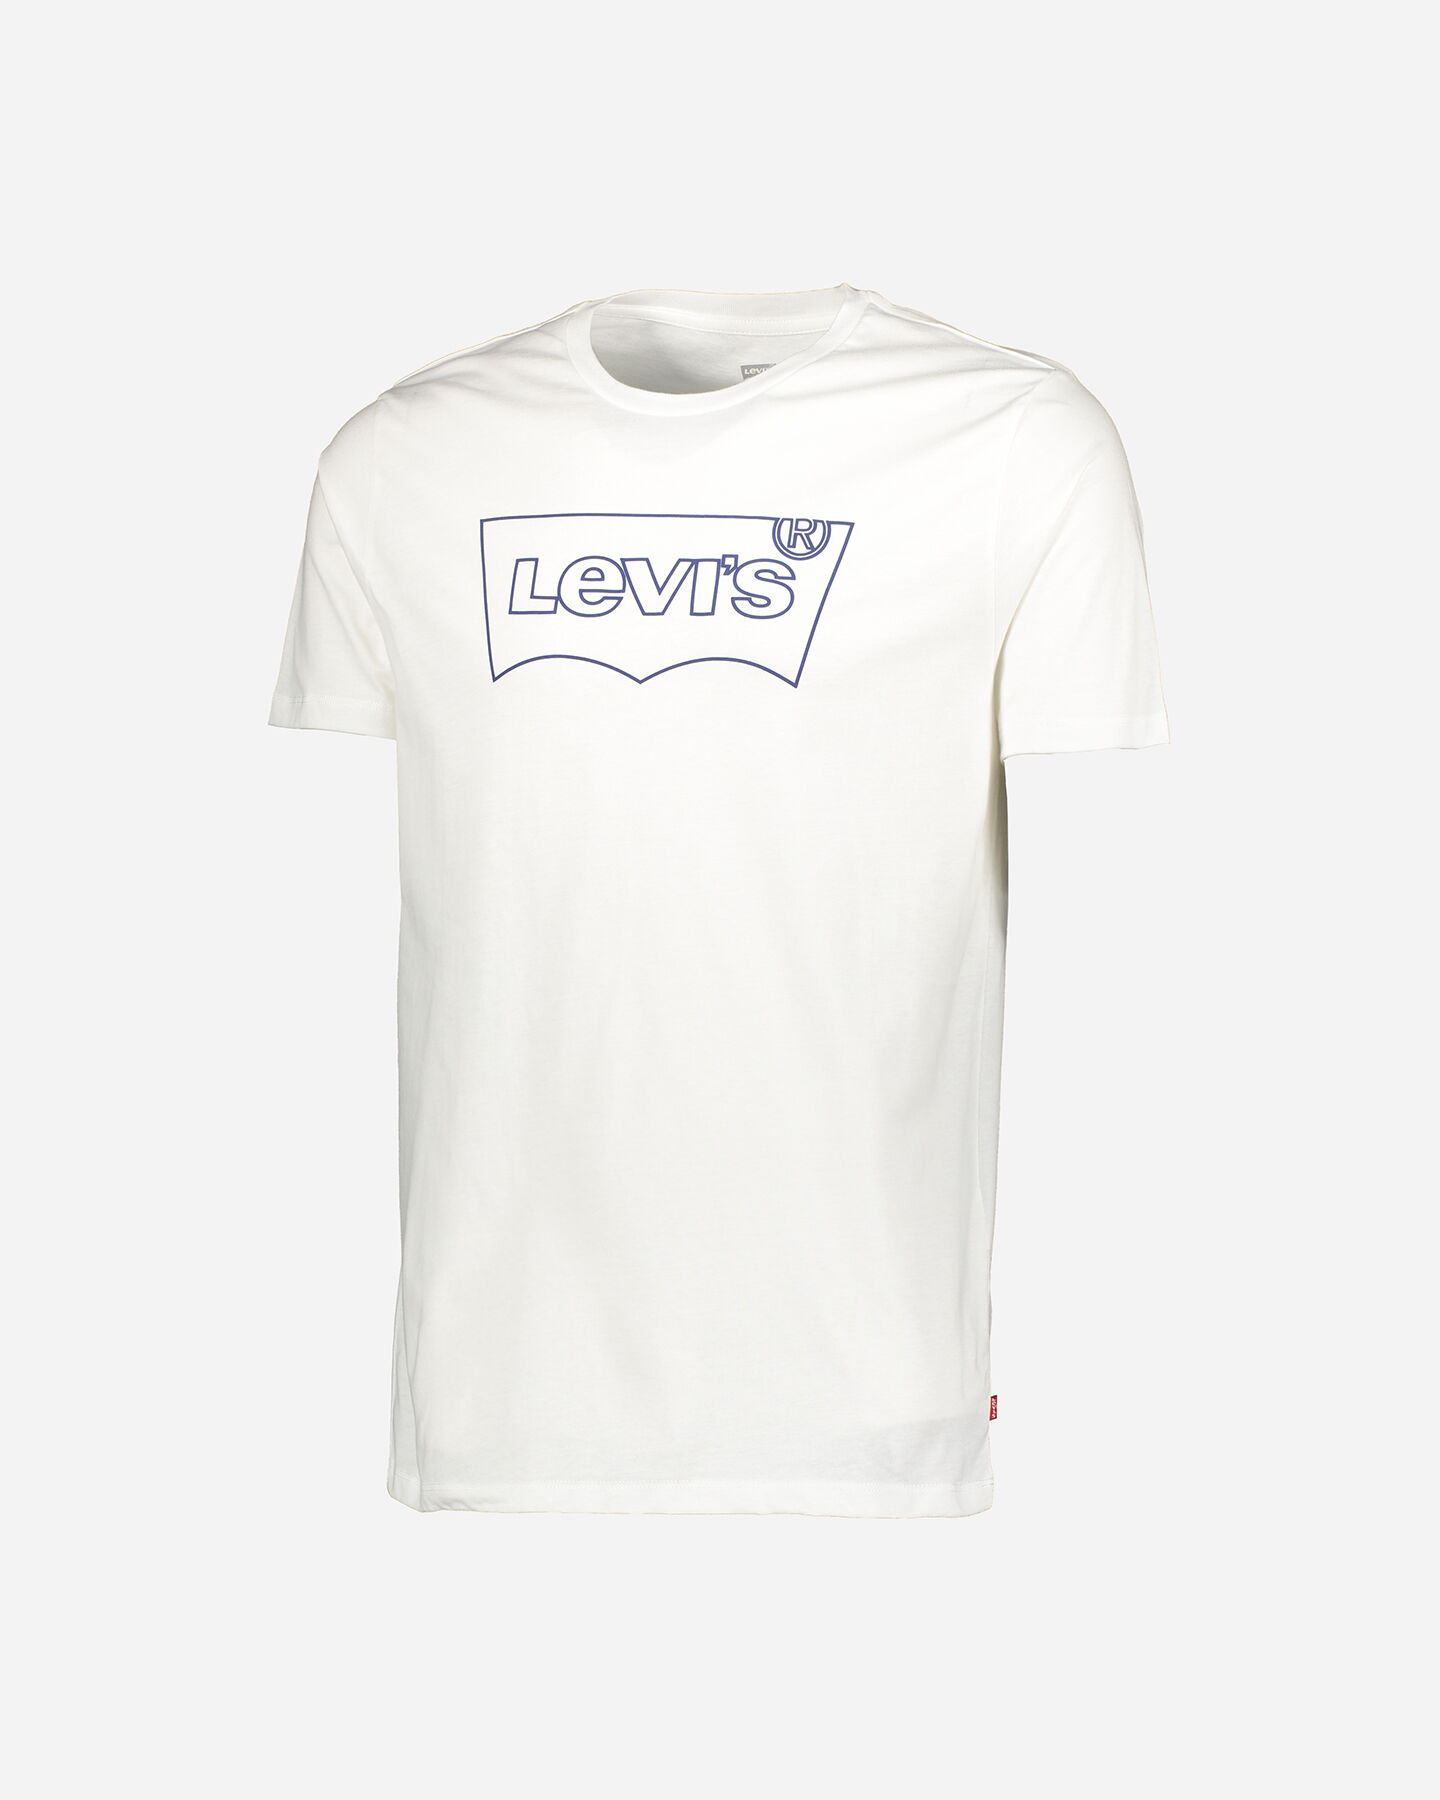  T-Shirt LEVI'S GRAPHIC LOGO OUTLINE M S4089897|0296|S scatto 0